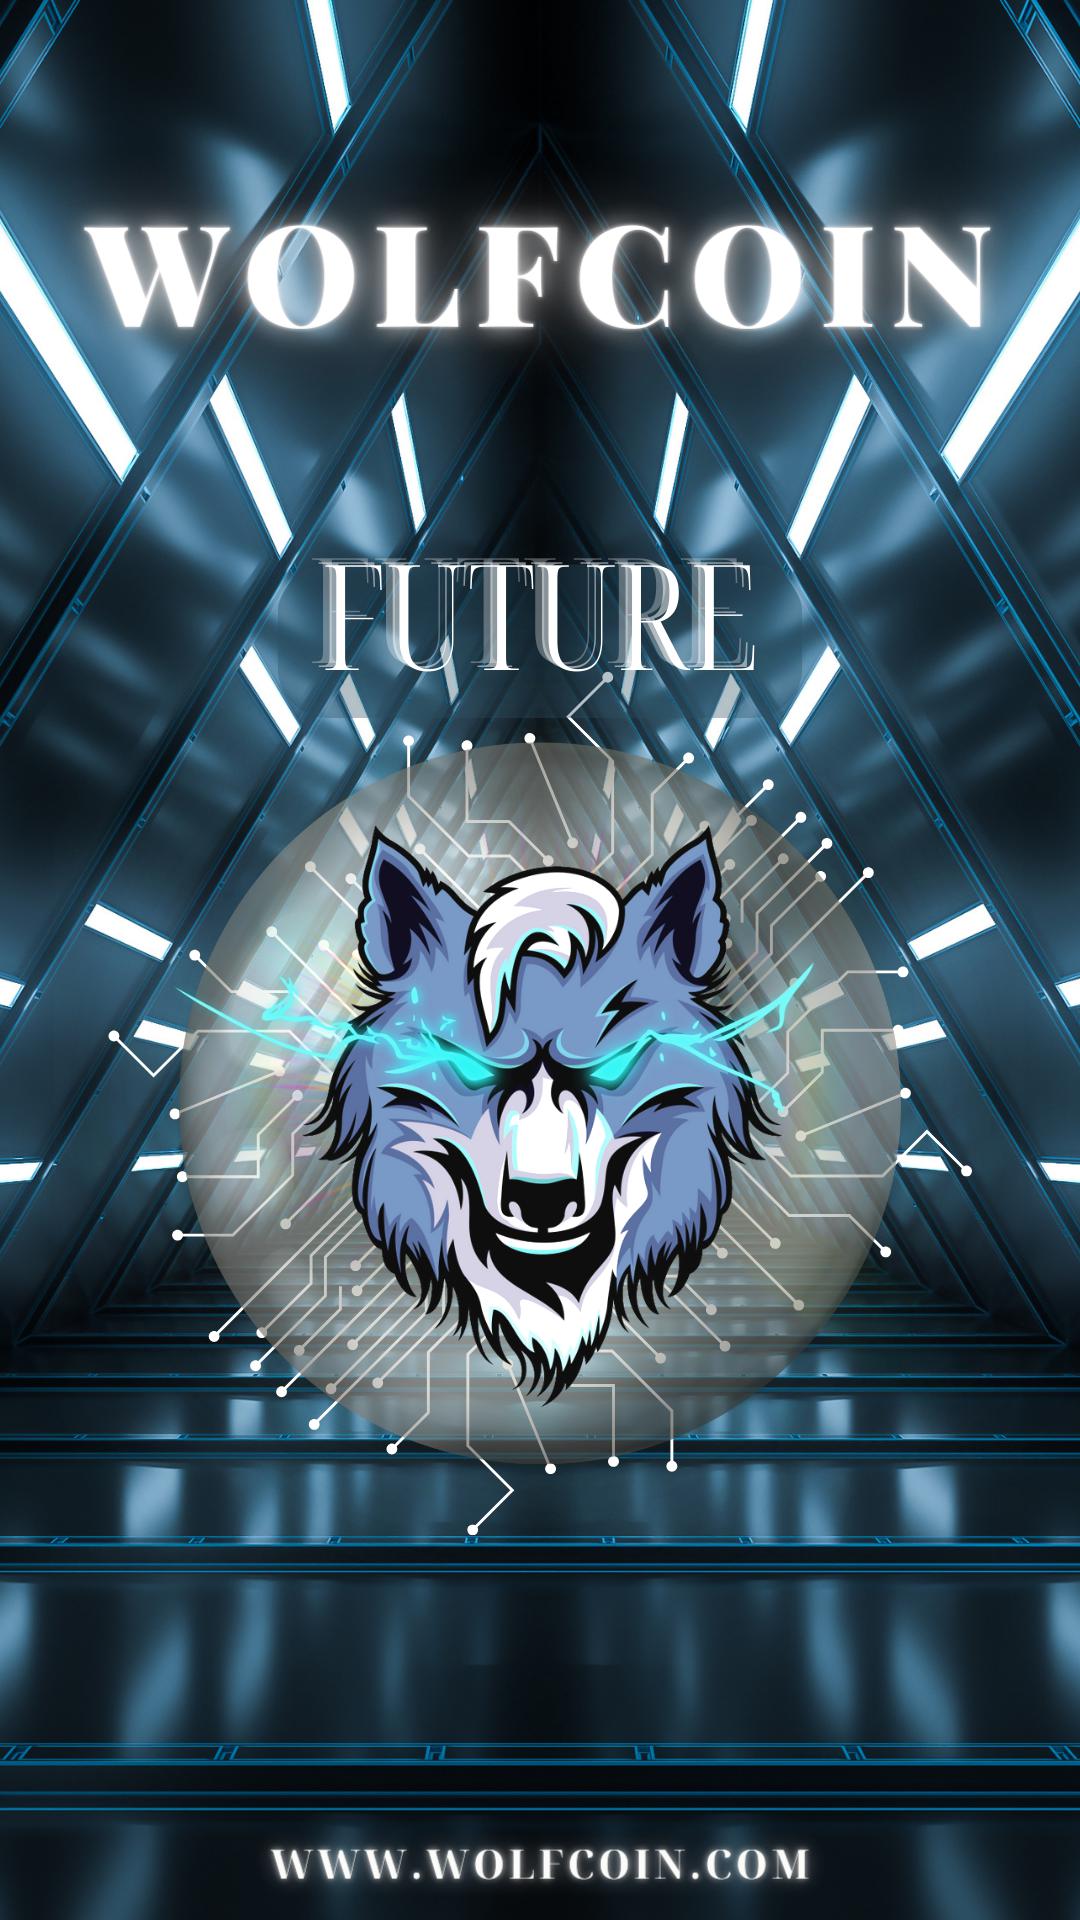 WOLFCOIN FUTURE.png.jpg